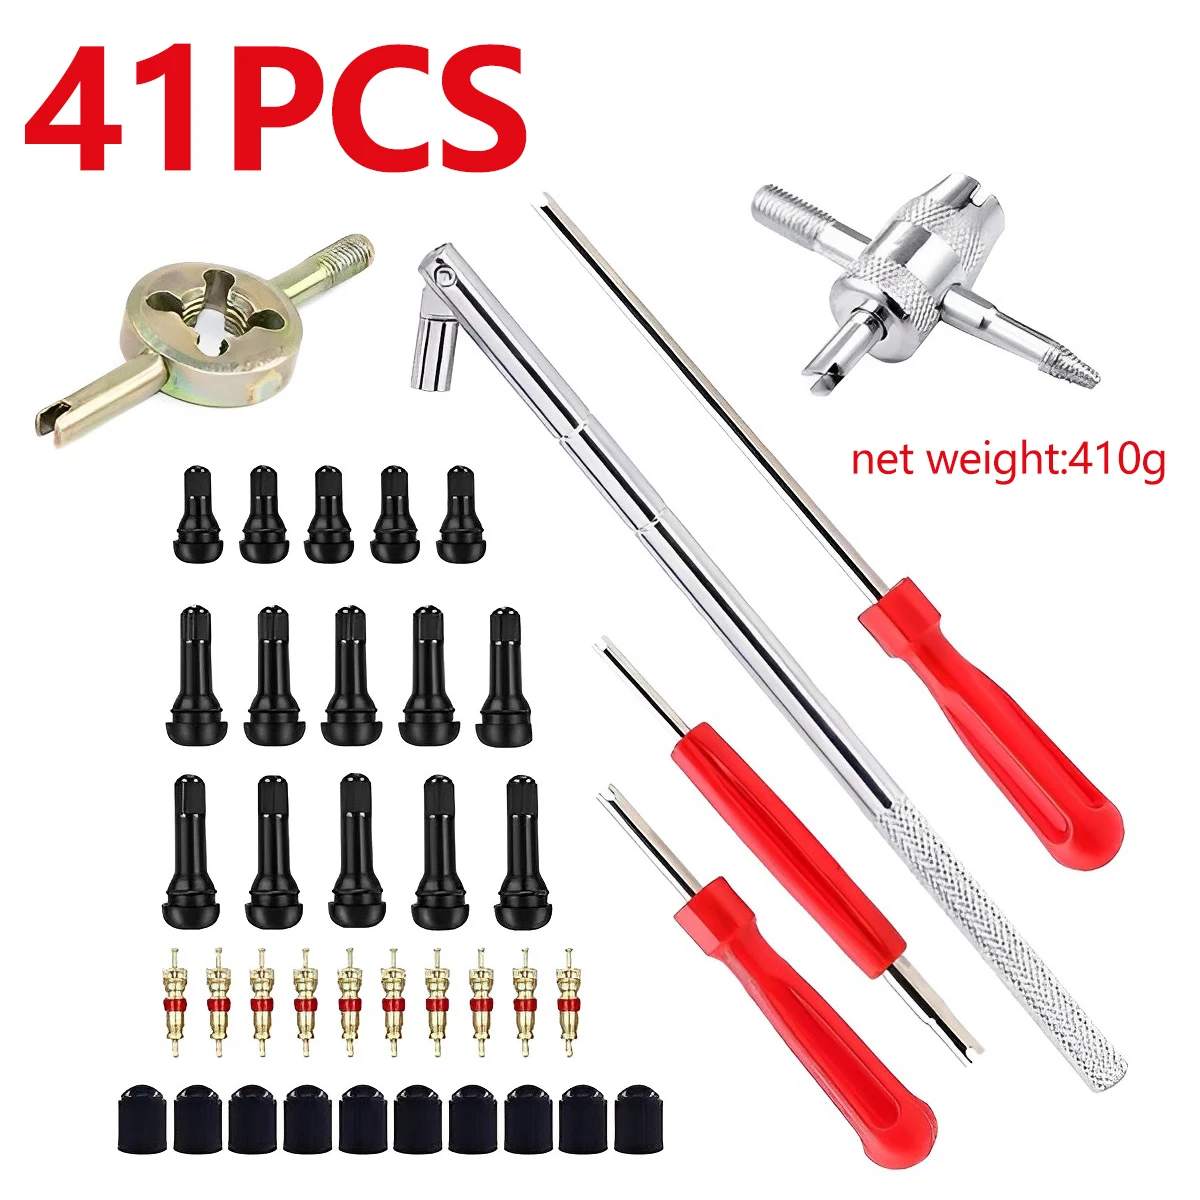 

41pcs Car Tire Valve Installation Tool Kit Tire Snap Valve Core Remover Tyre Stem Core Puller Fast Remover Disassembly for car